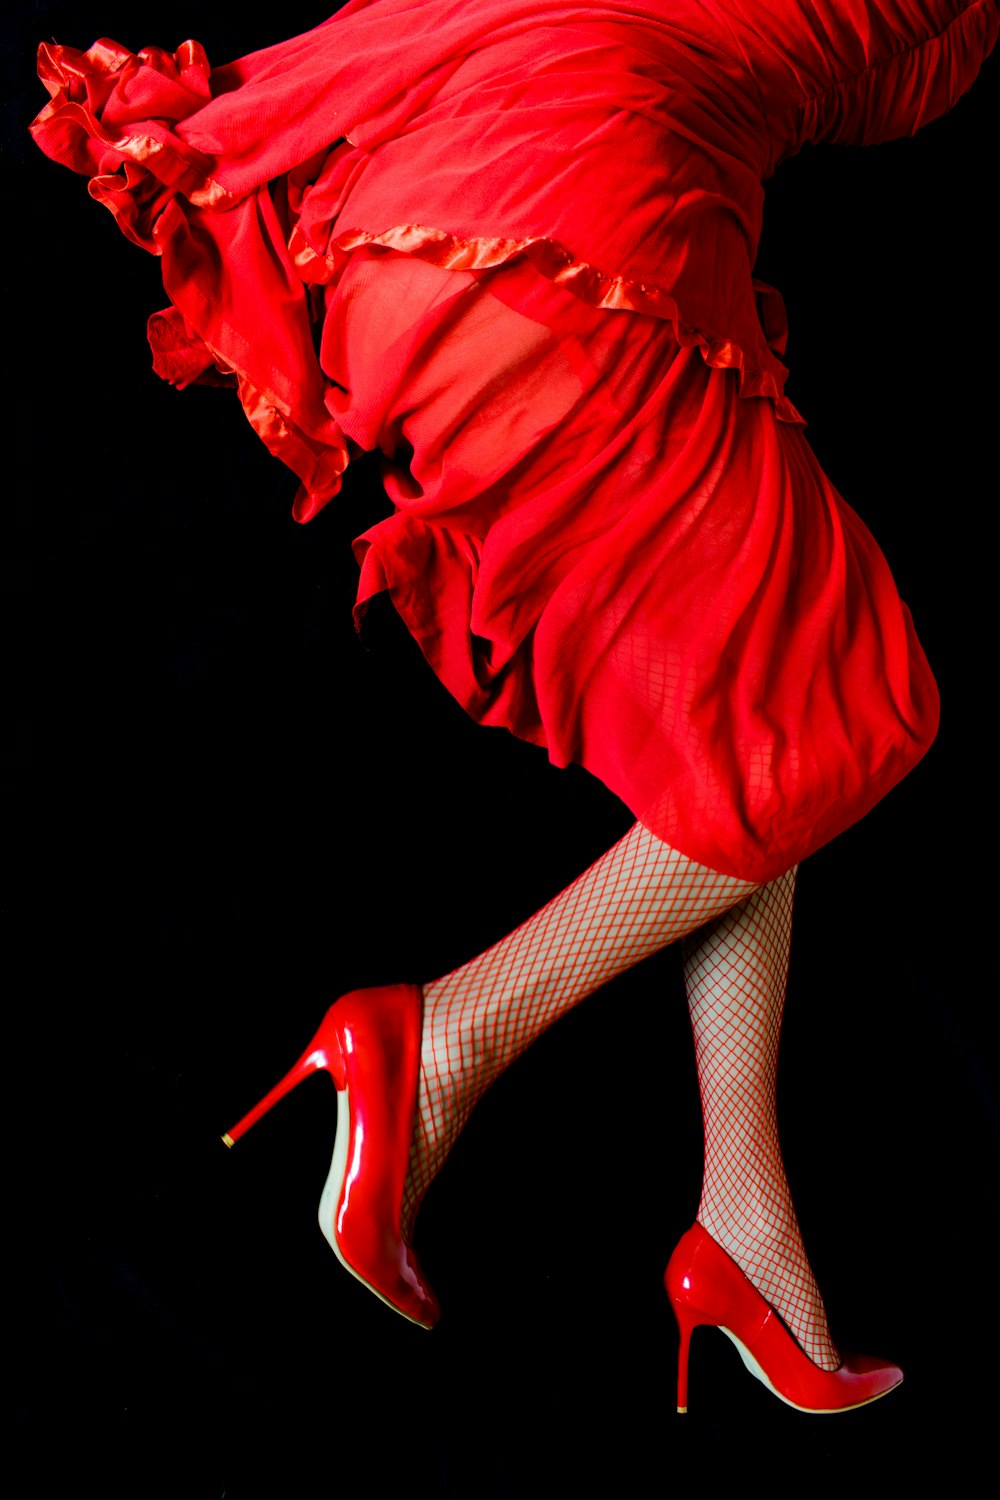 a woman in a red dress and high heels